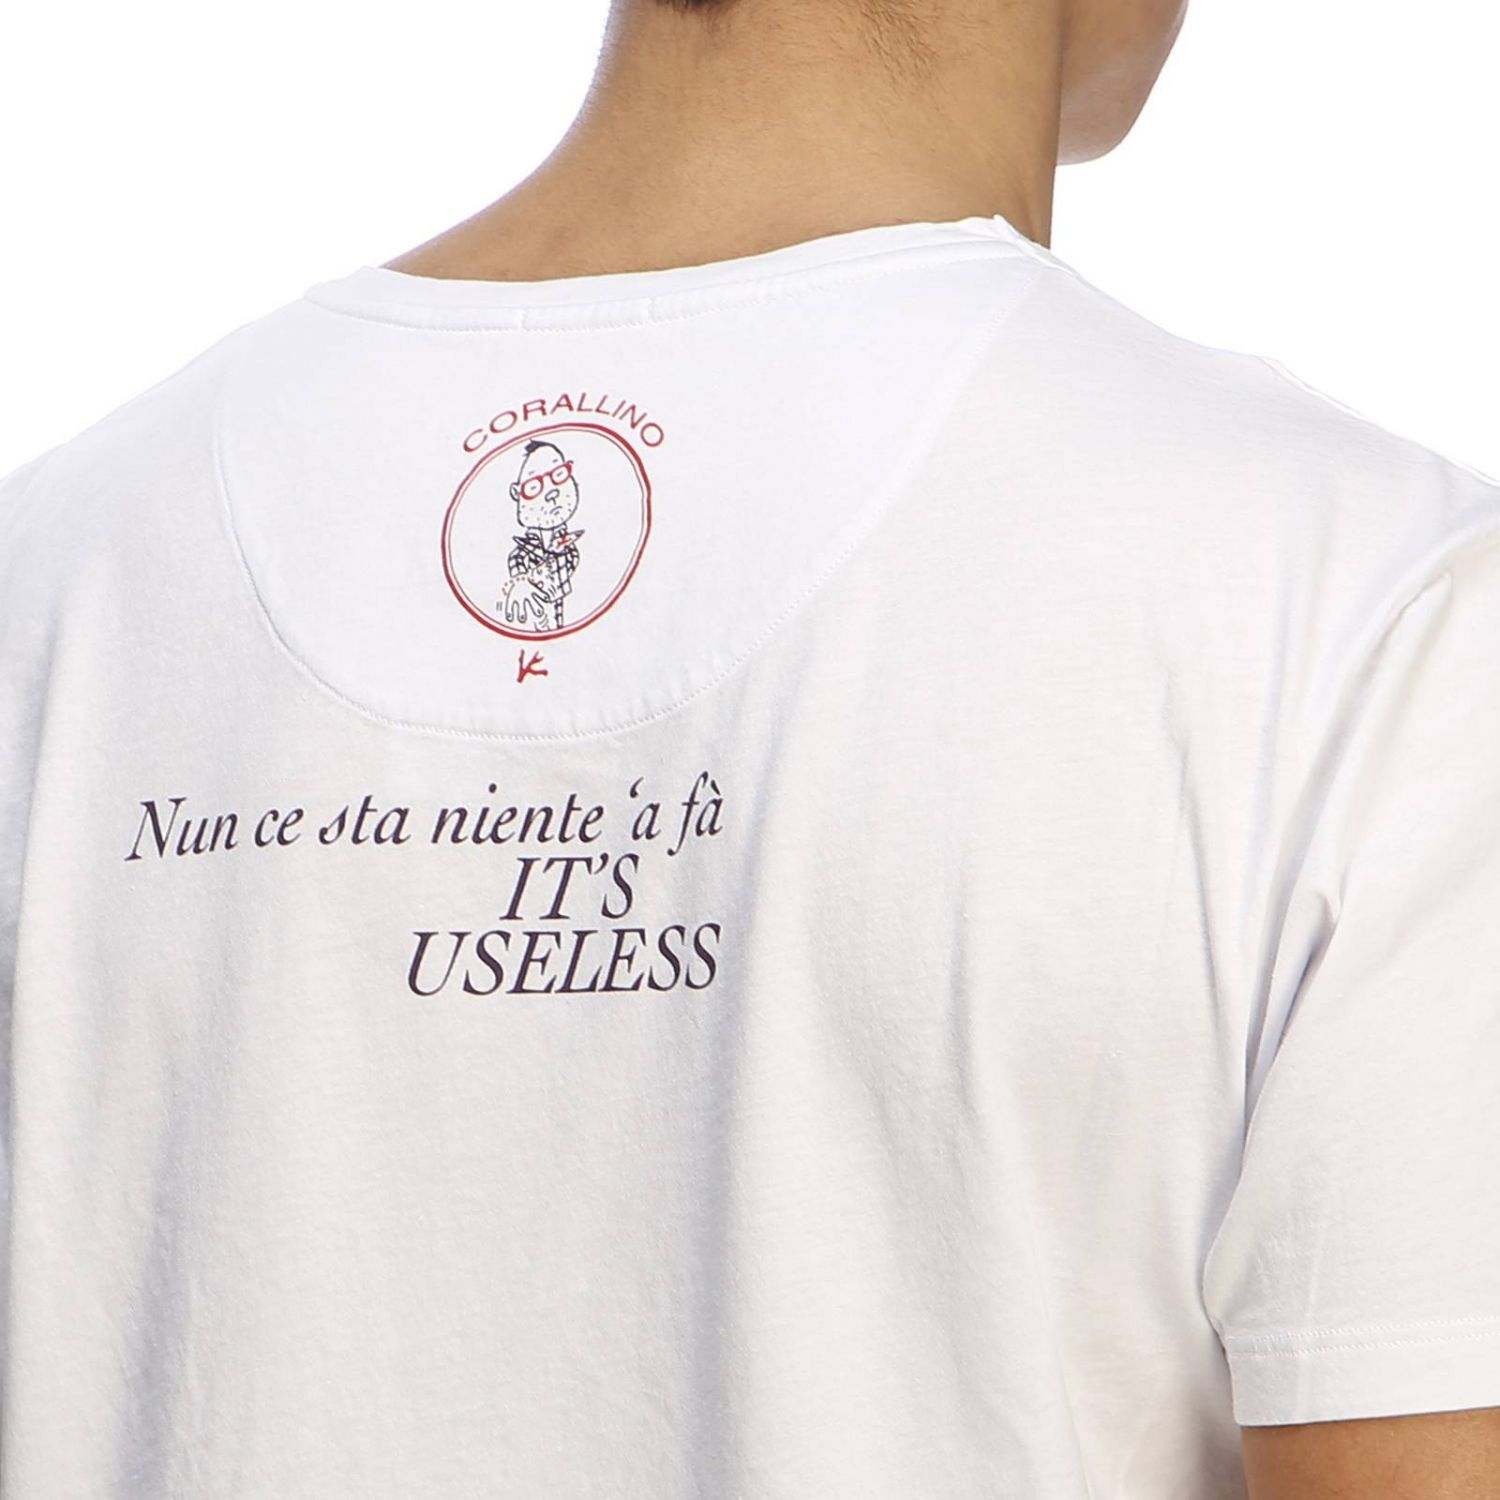 Isaia Outlet: t-shirt for man - White | Isaia t-shirt MCC005 JC002 ...